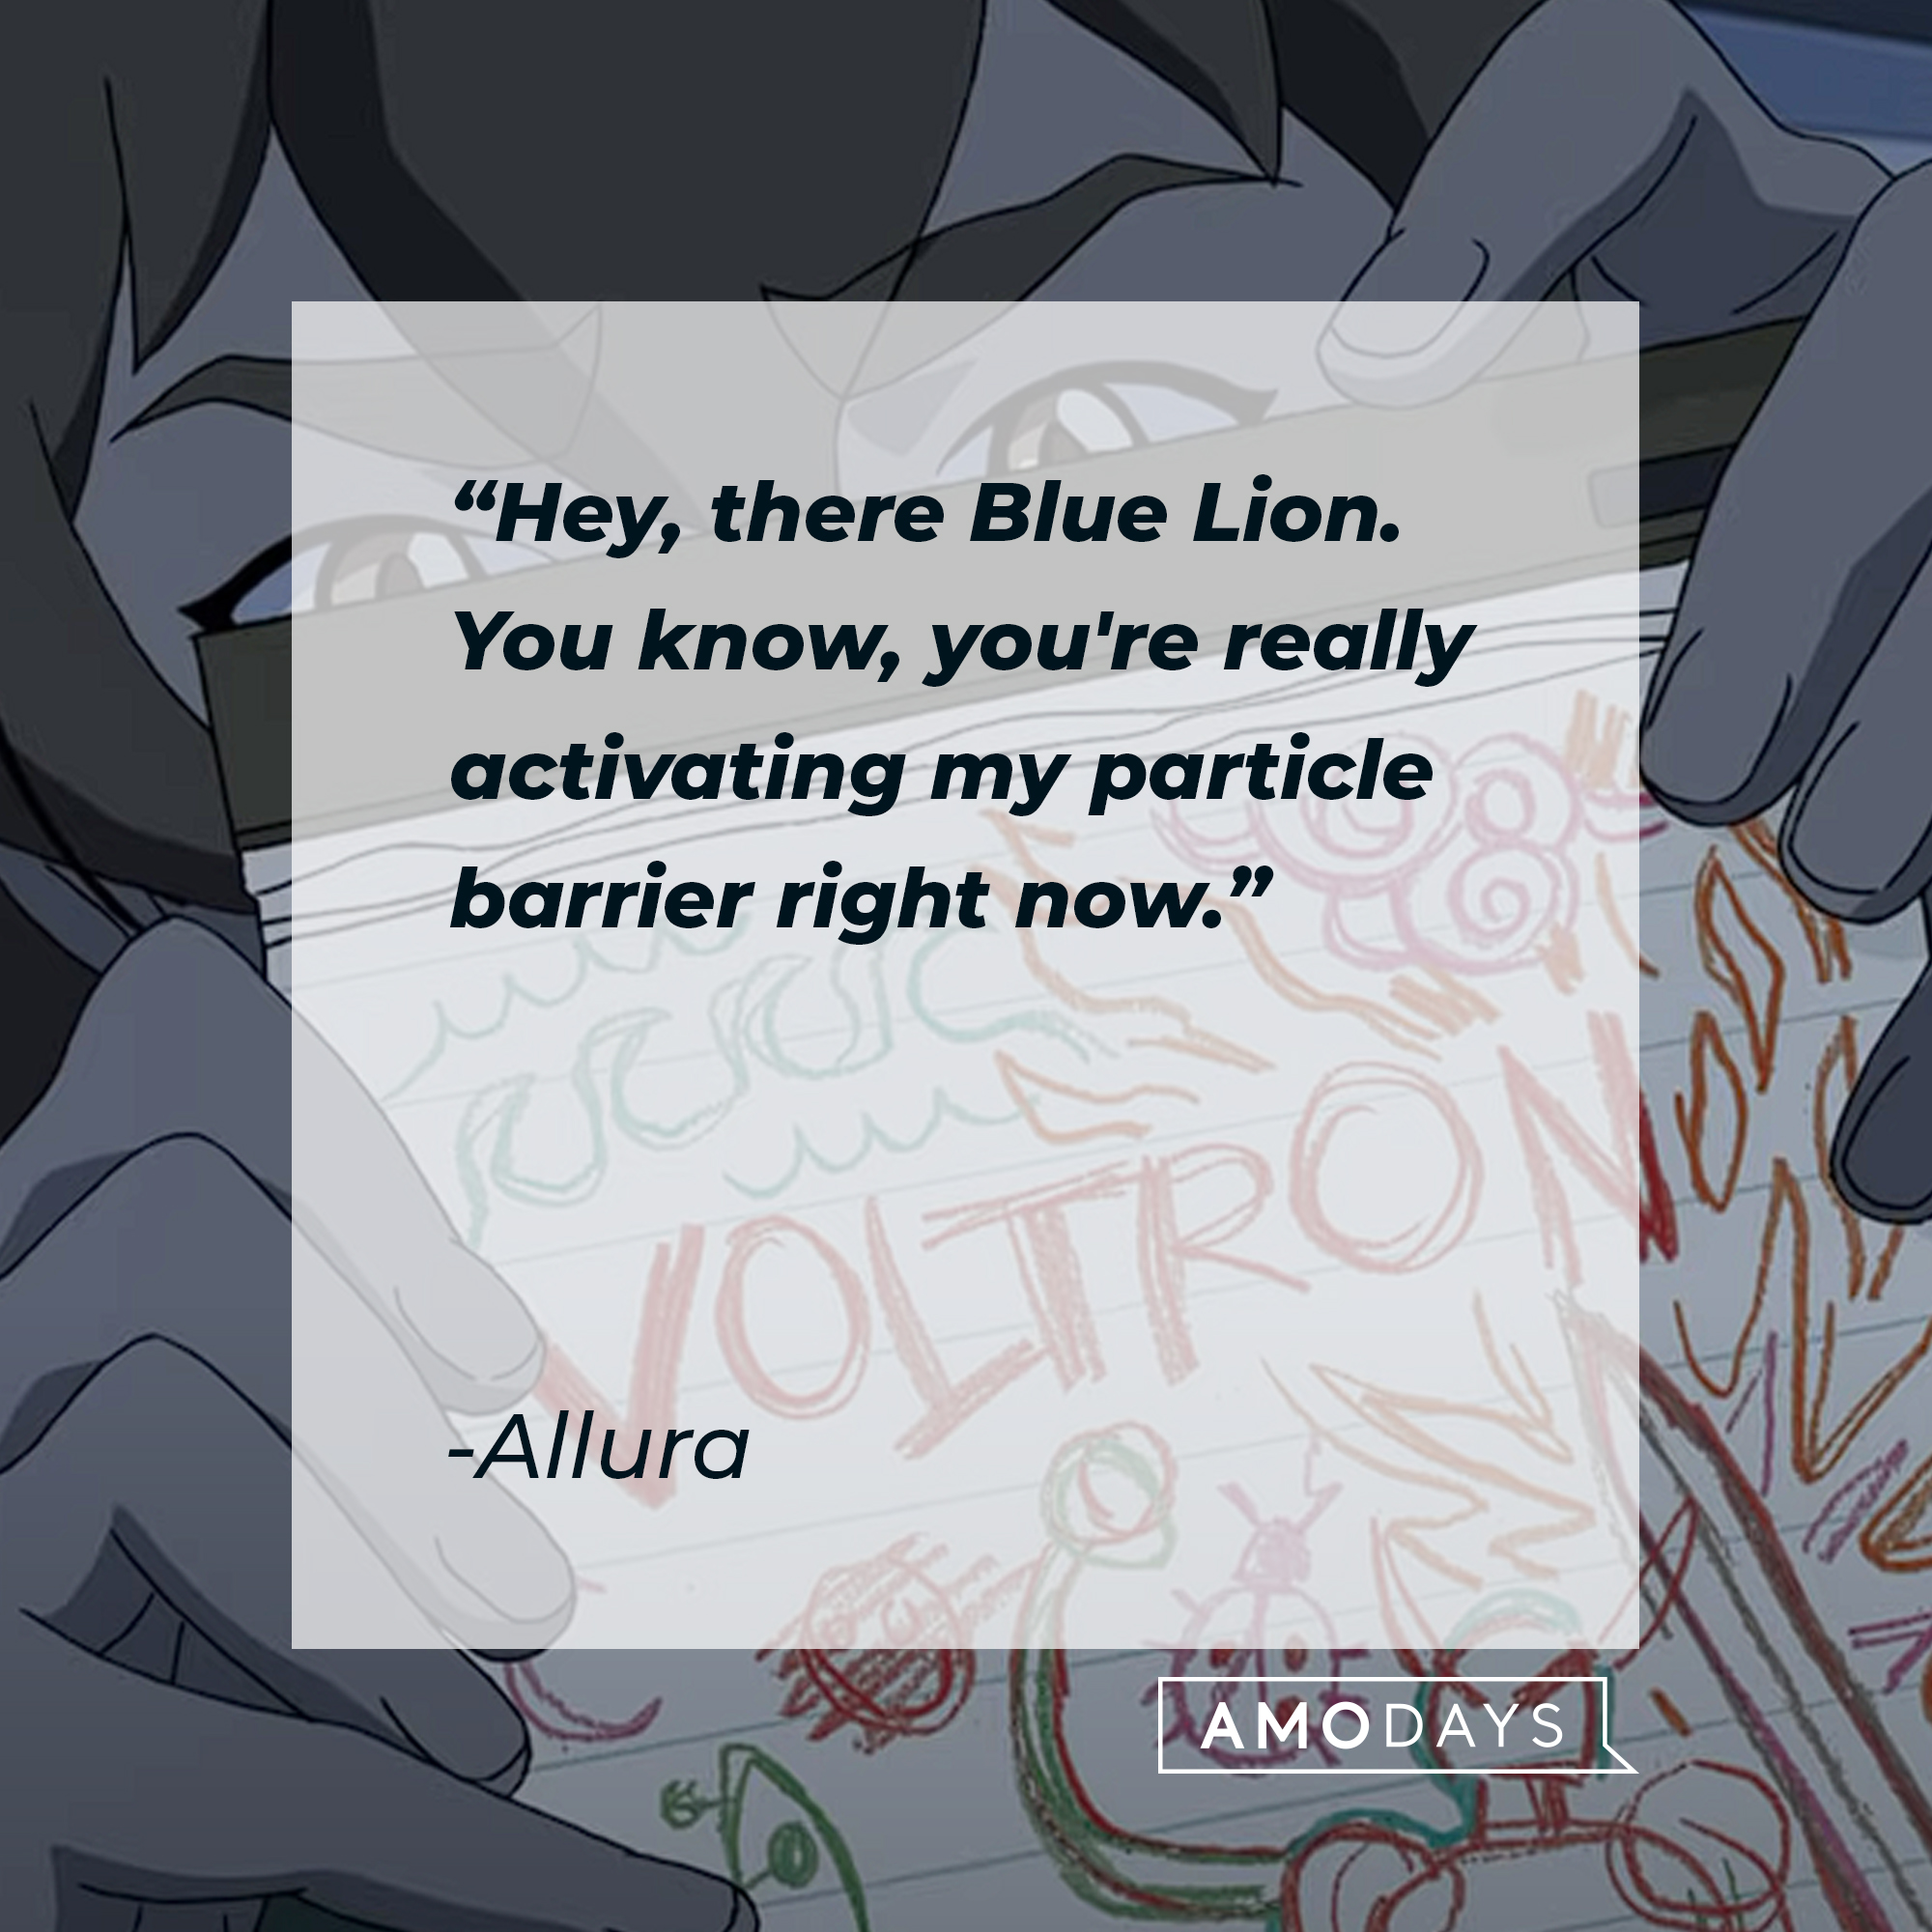 Allura's quote: "Hey, there Blue Lion. You know, you're really activating my particle barrier right now." | Source: youtube.com/netflixafterschool